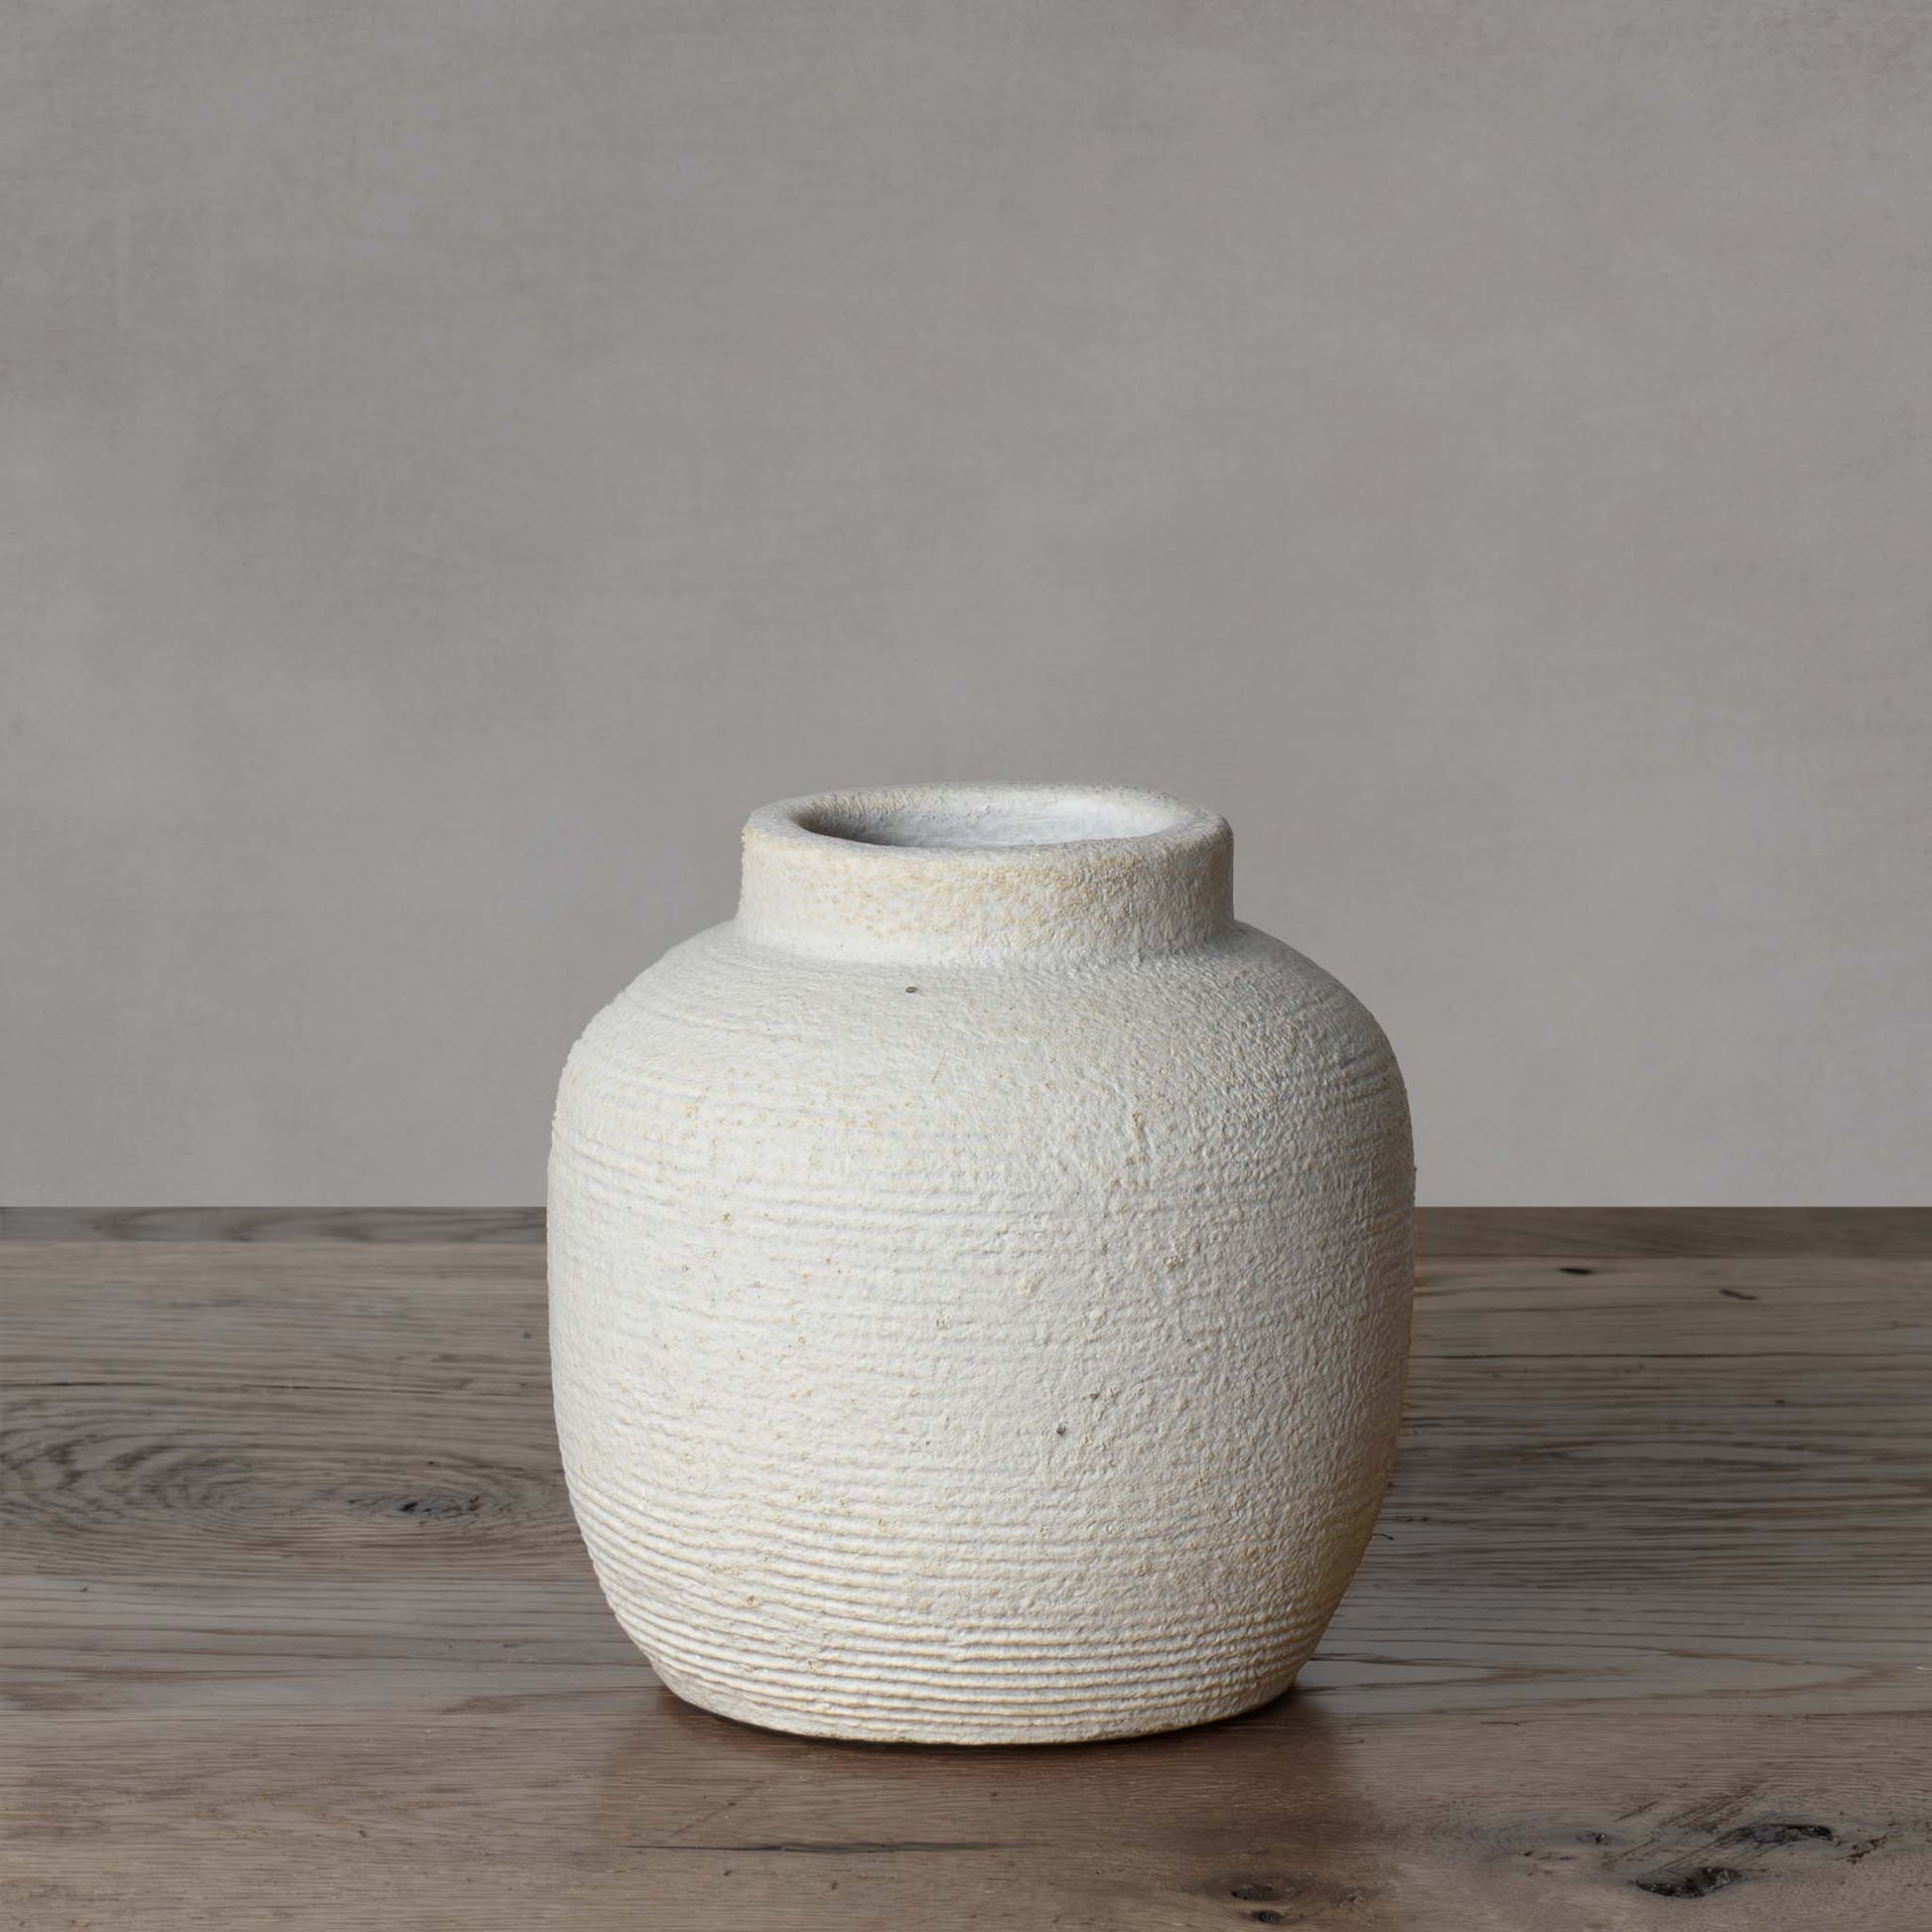 Small textured cement decorative vase with light gray background.